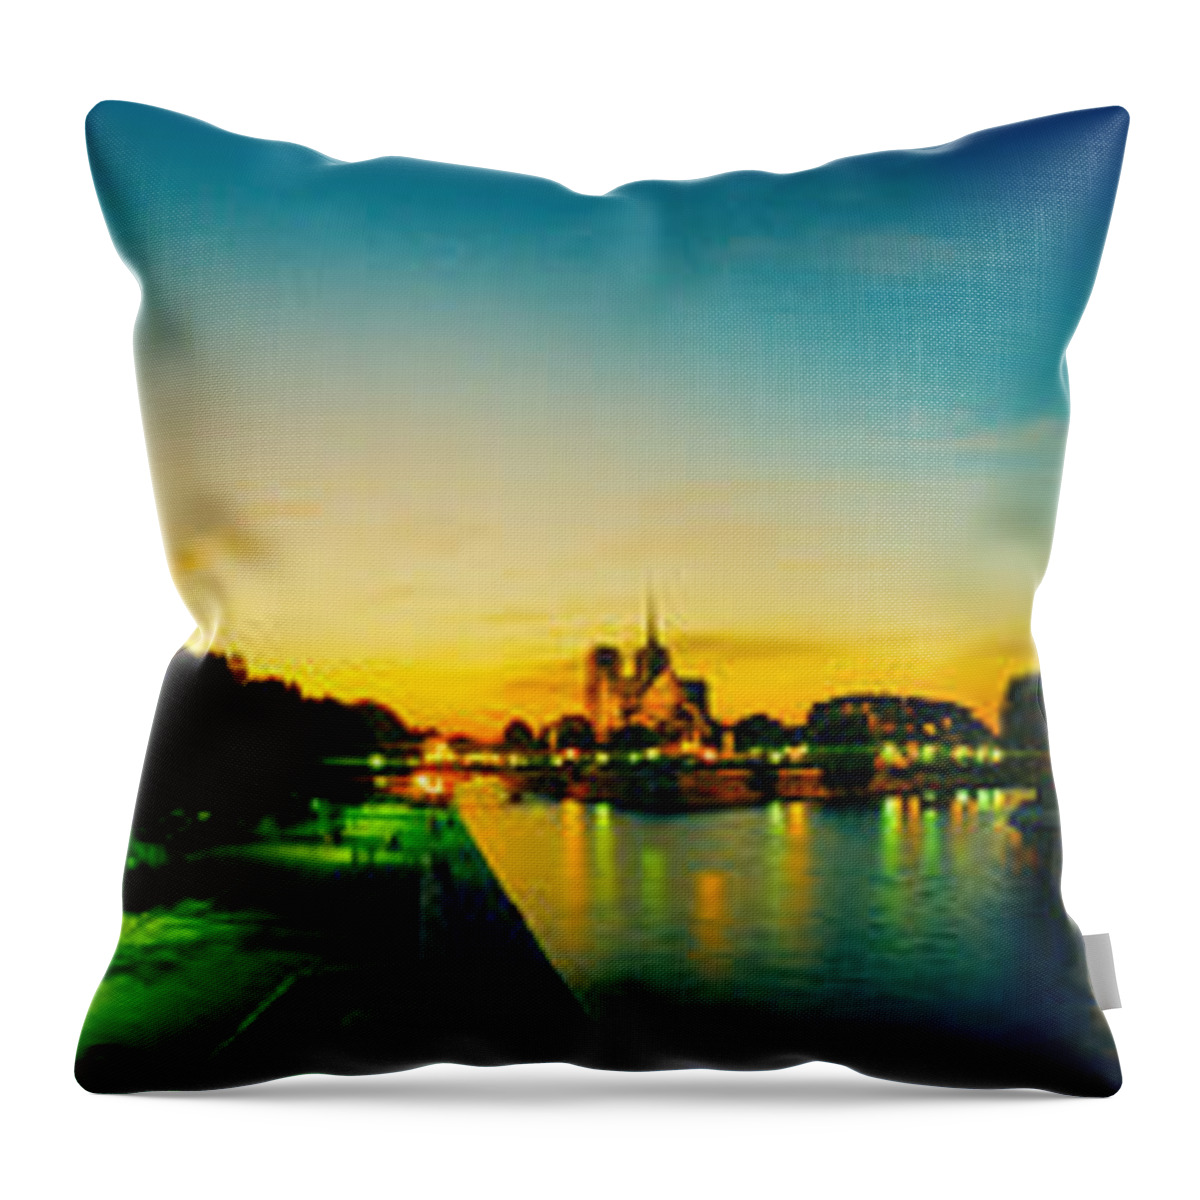 Photography Throw Pillow featuring the photograph City Lit Up At Dusk, Notre Dame, Paris by Panoramic Images